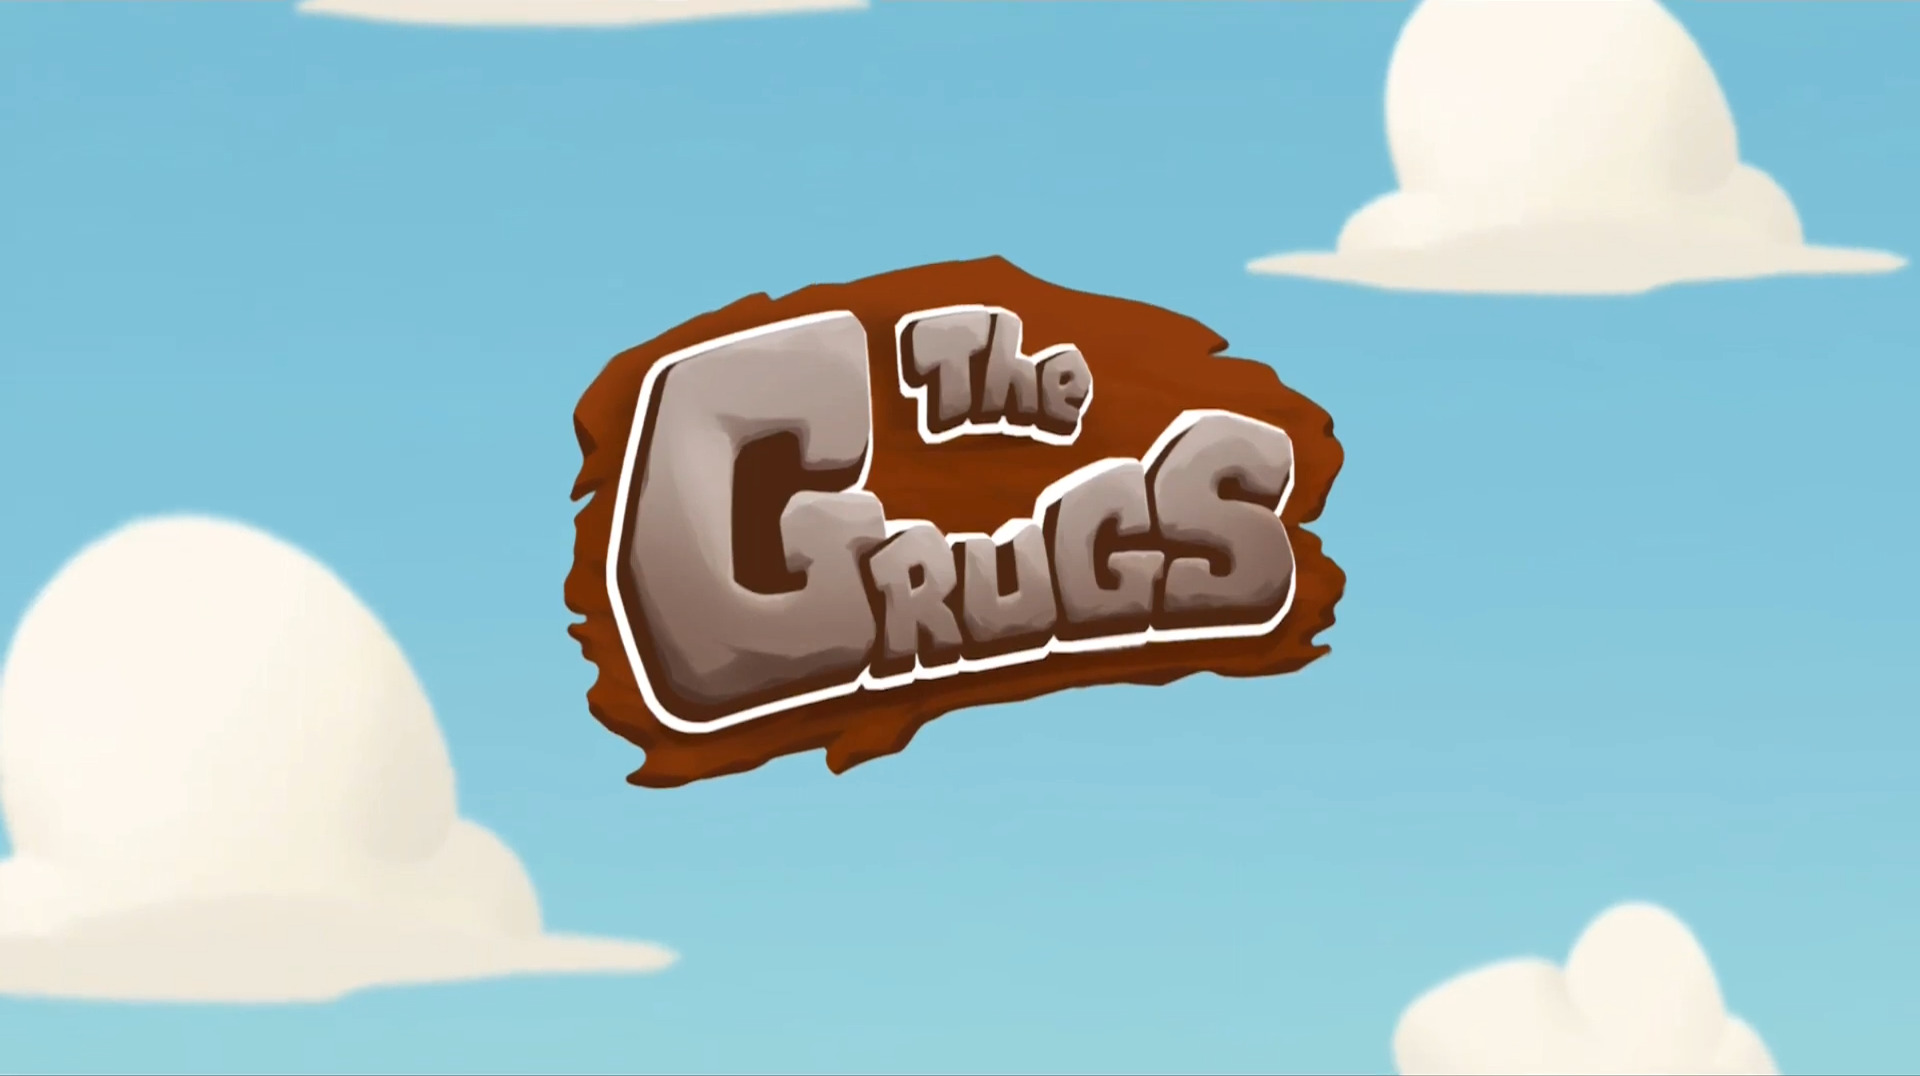 Télécharger The Grugs: Hector's rest quest pour Android A.n.d.r.o.i.d. .5...0. .a.n.d. .m.o.r.e gratuit.